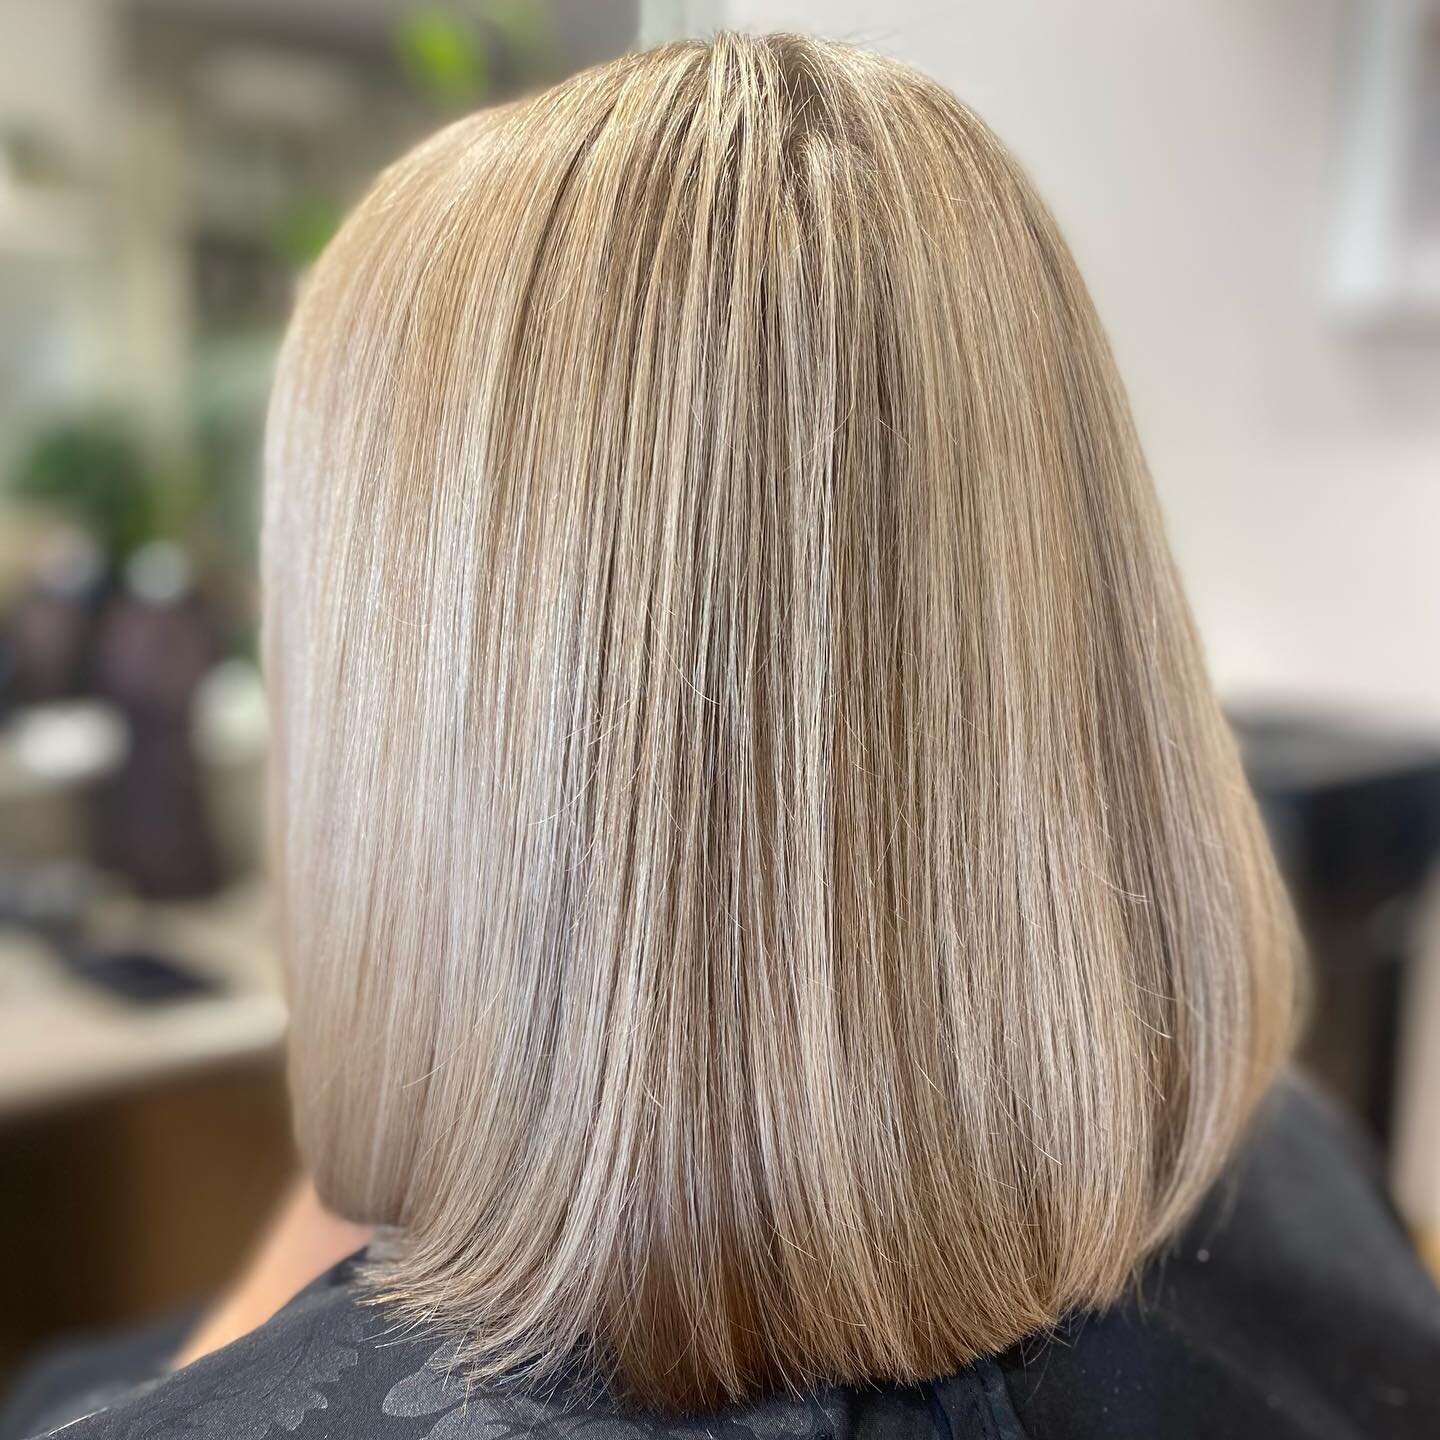 I&rsquo;m very started to recommend my guests have a toner in between foils so that they have that fresh toned look without damaging their hair with over processing foils. It works so well and is so much better for the hair. This is what I did today,